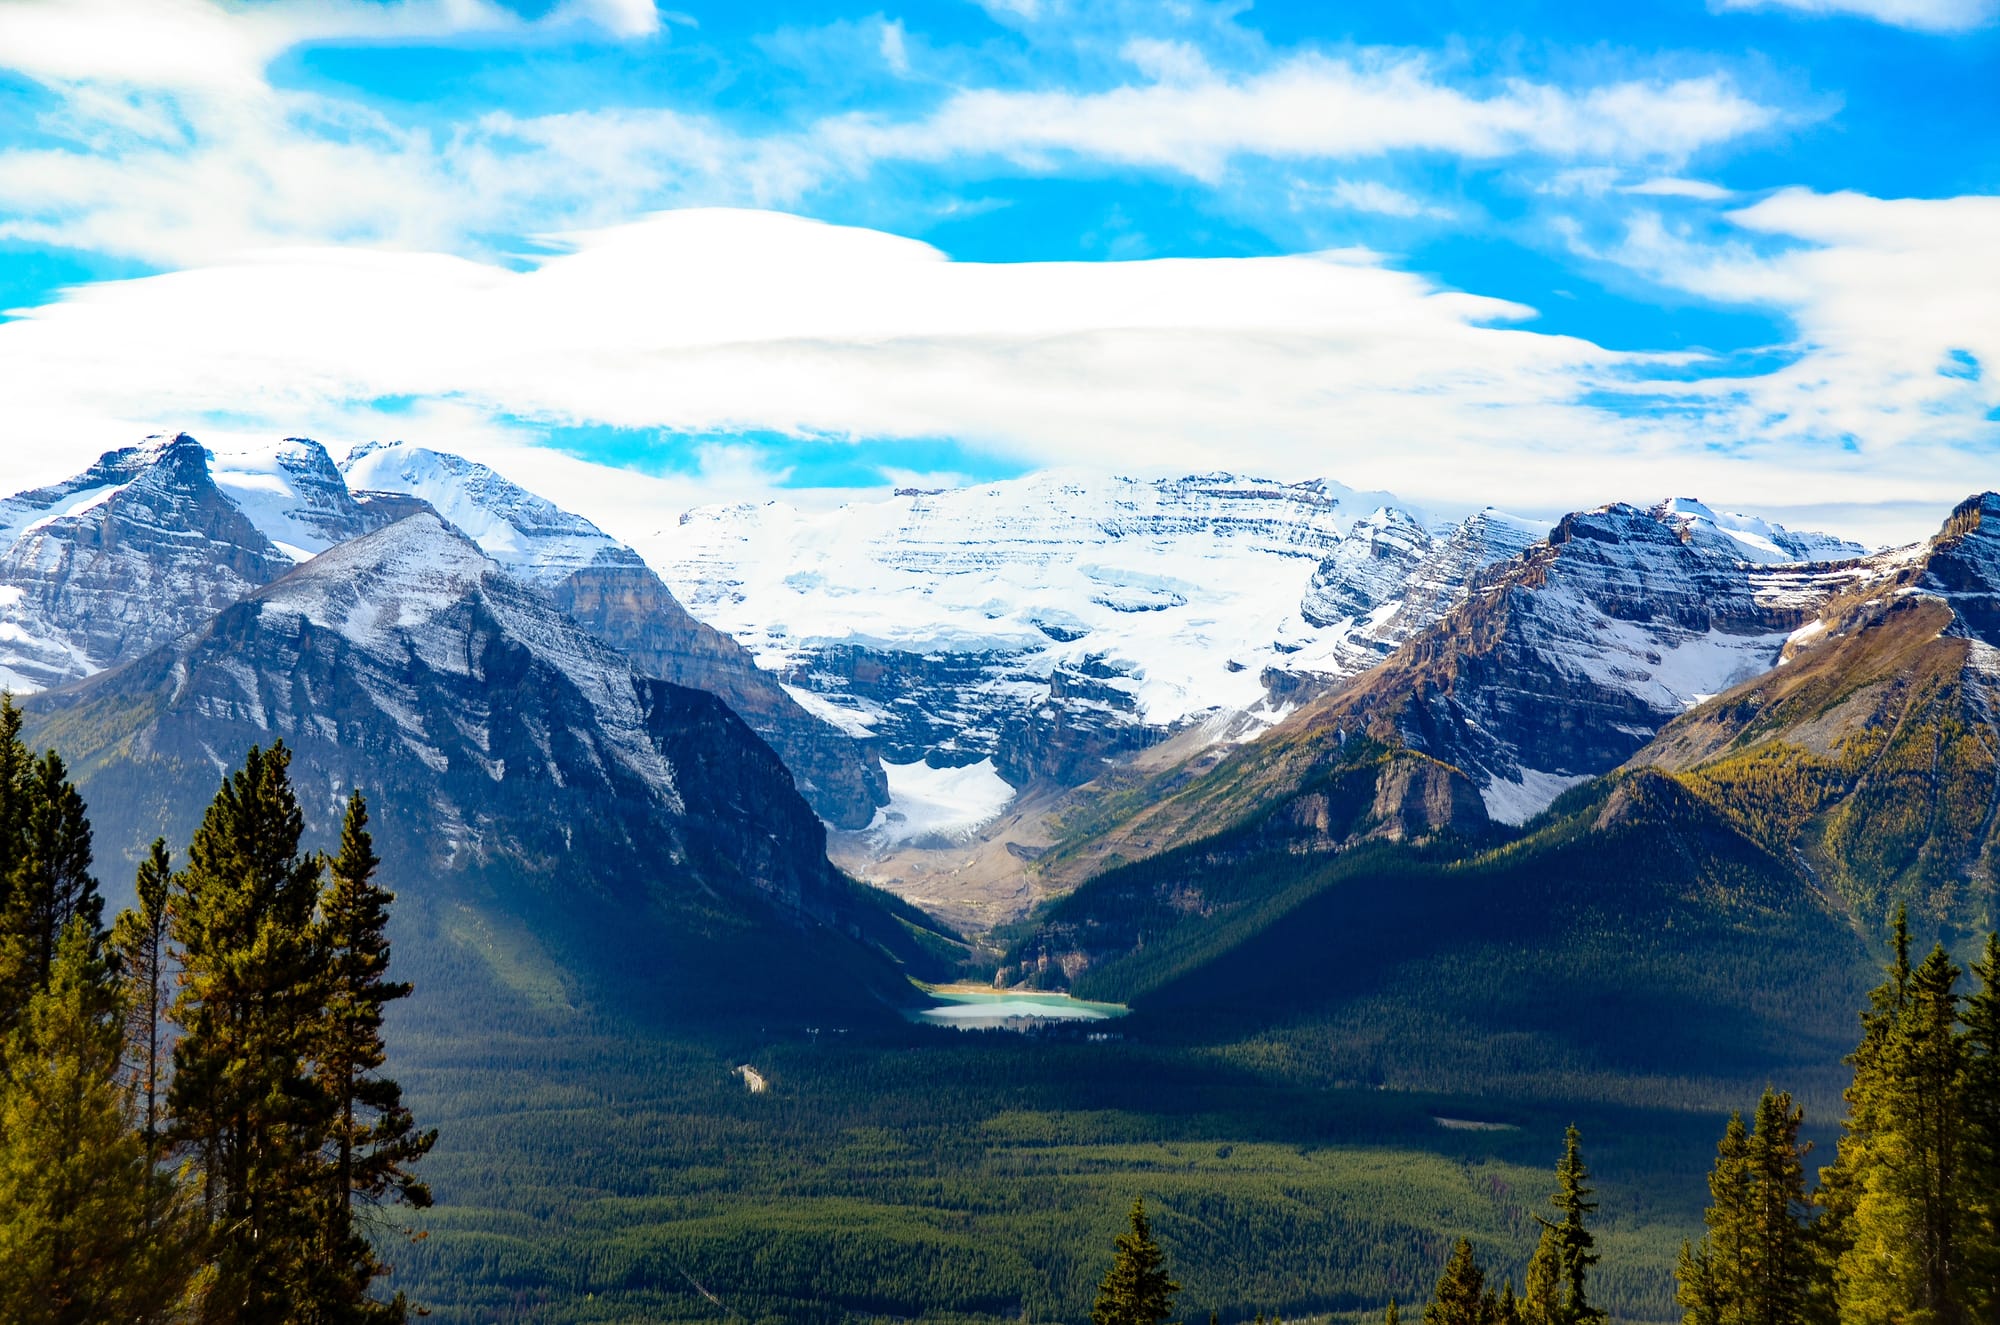 Canadian Rocky Mountain parks